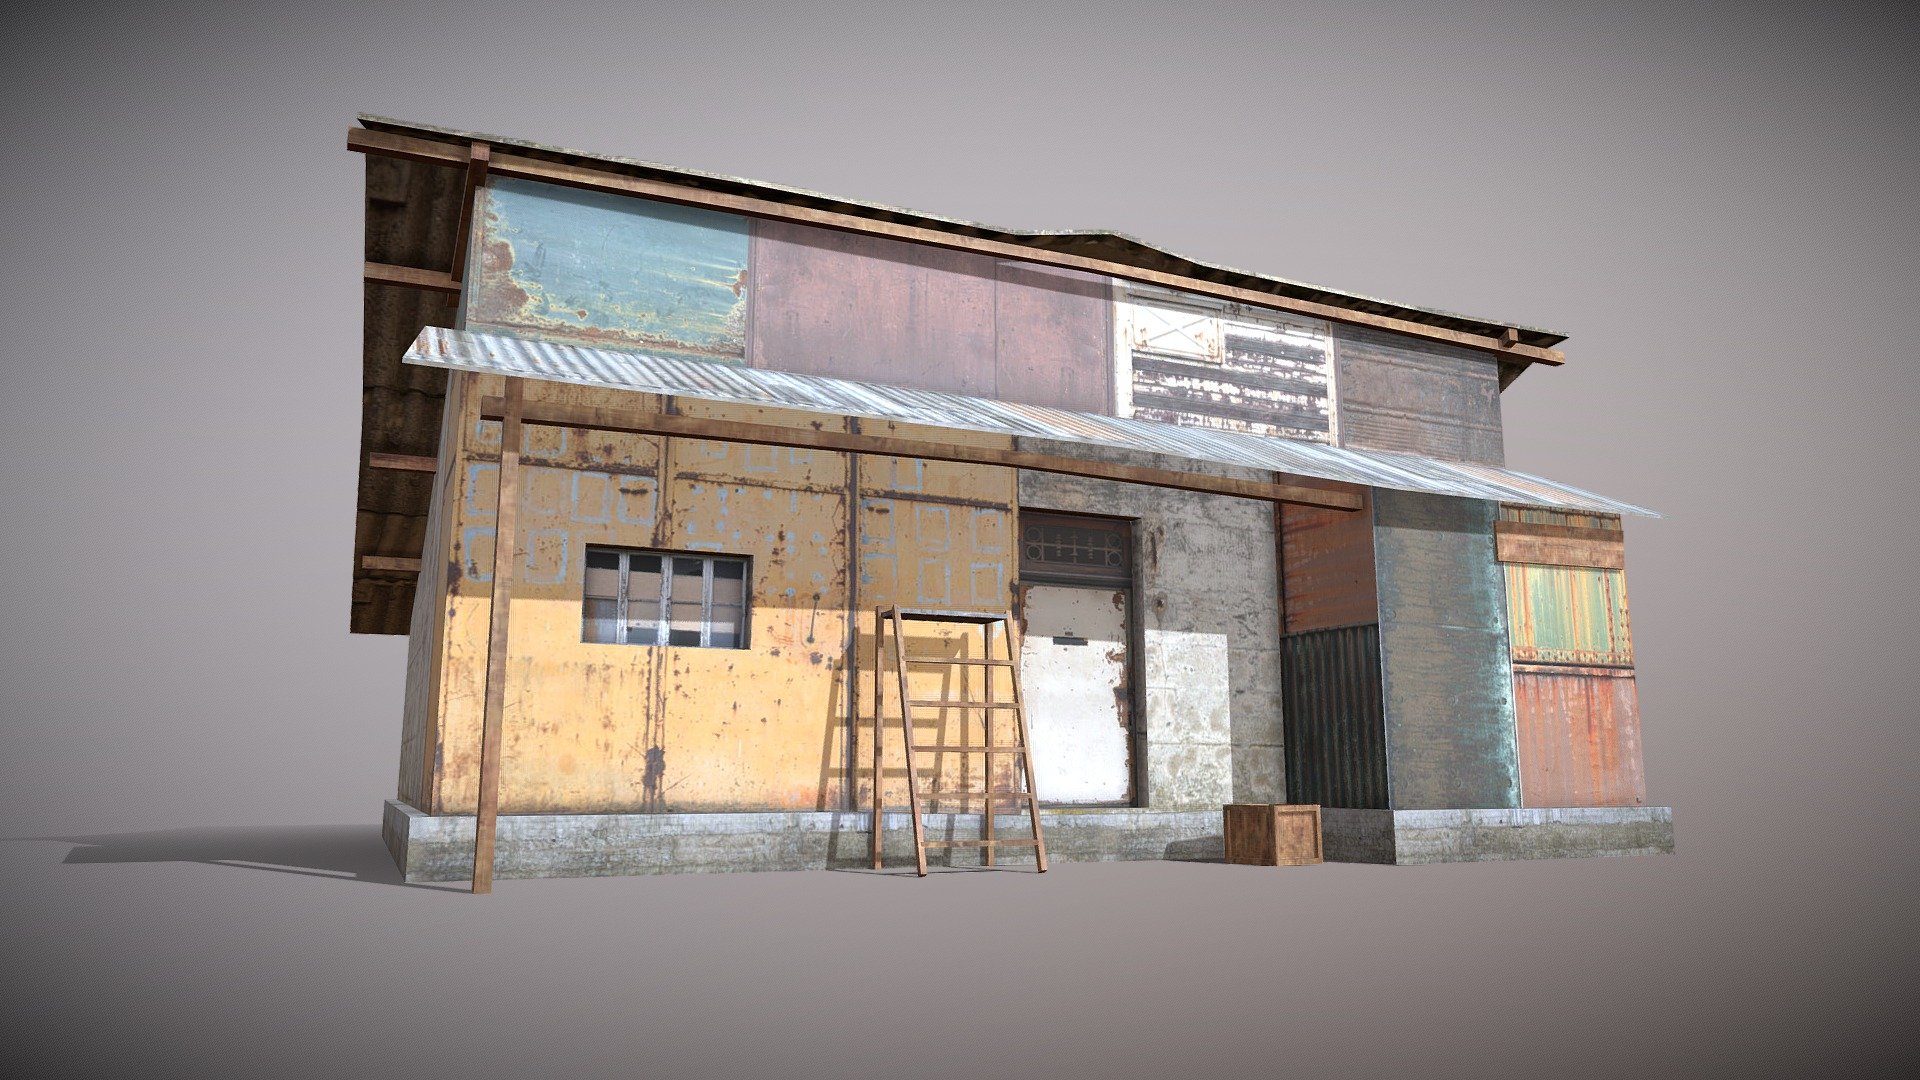 Game Ready 3D Old House /slum Native file format 3Ds max 2022 Other formats Blender 4.0 ,FBX, OBJ, All formats include materials &amp; textures

Polygons- 379 Vertices - 434

Materials &amp; textures. 1 Diffuse Map 2048x2048 - Slum X5 - Buy Royalty Free 3D model by 3DRK (@3DRK98) 3d model